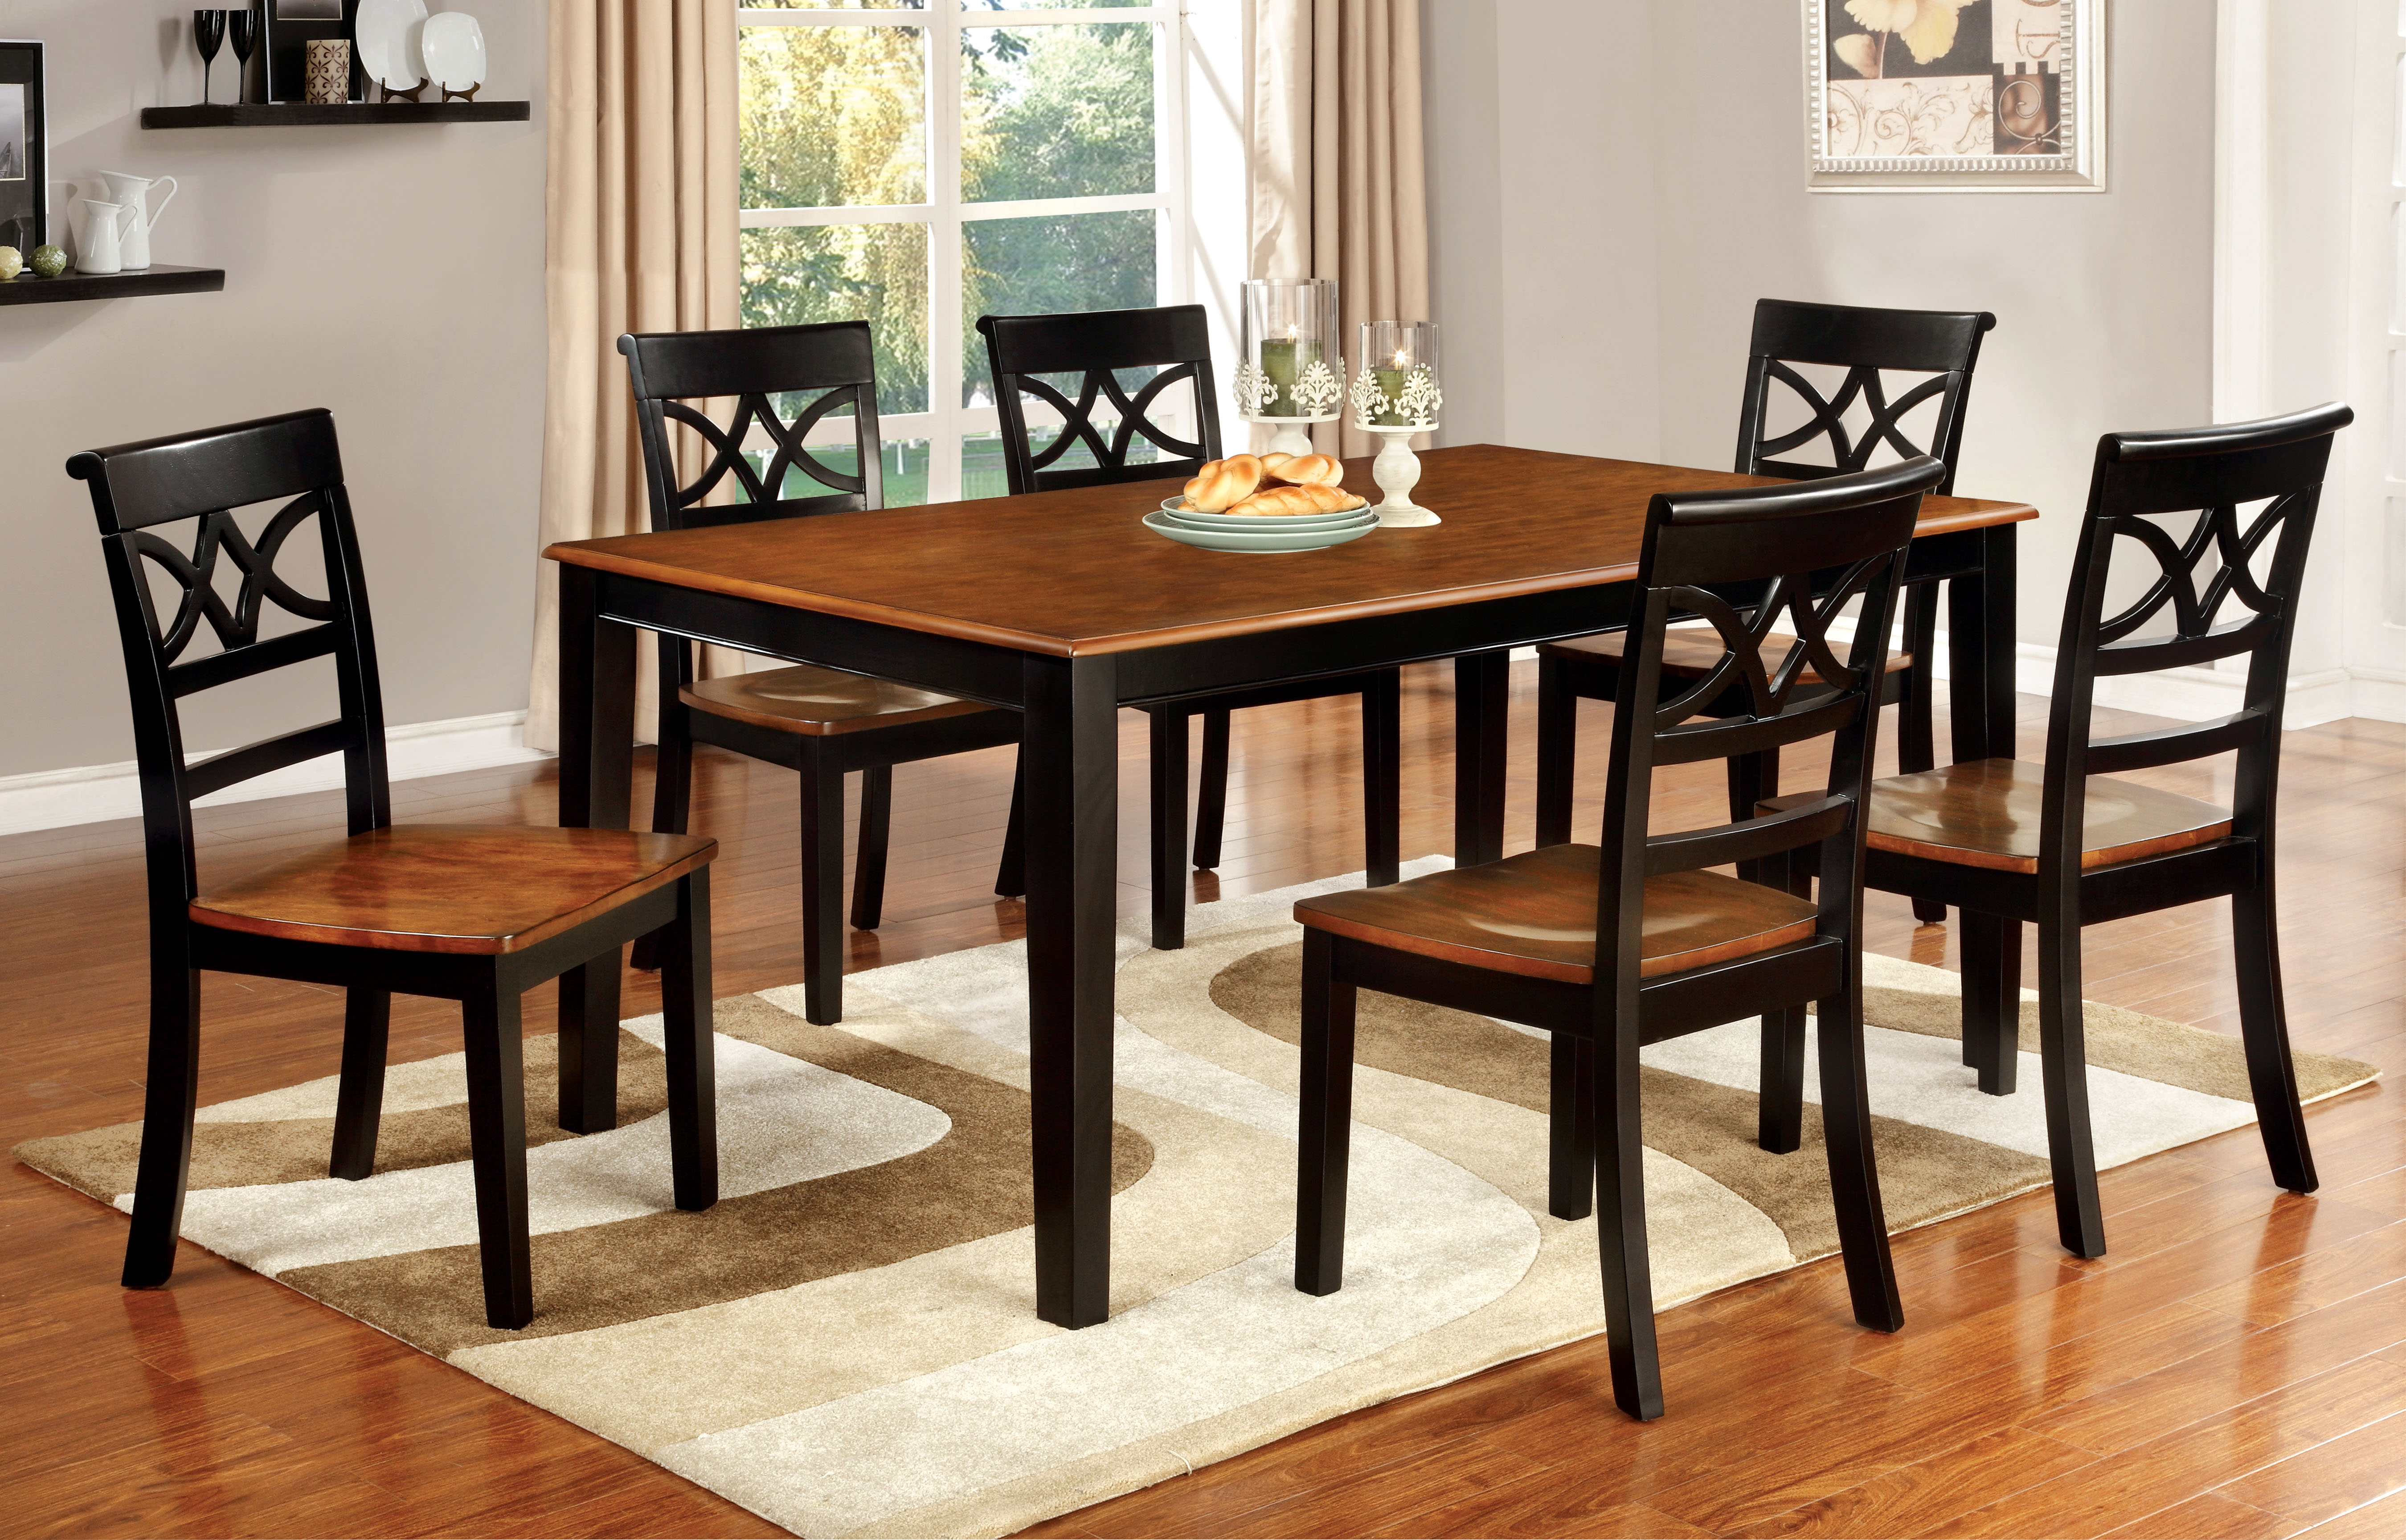 Furniture of America Two-Tone Adelle Country Style Dining ...
